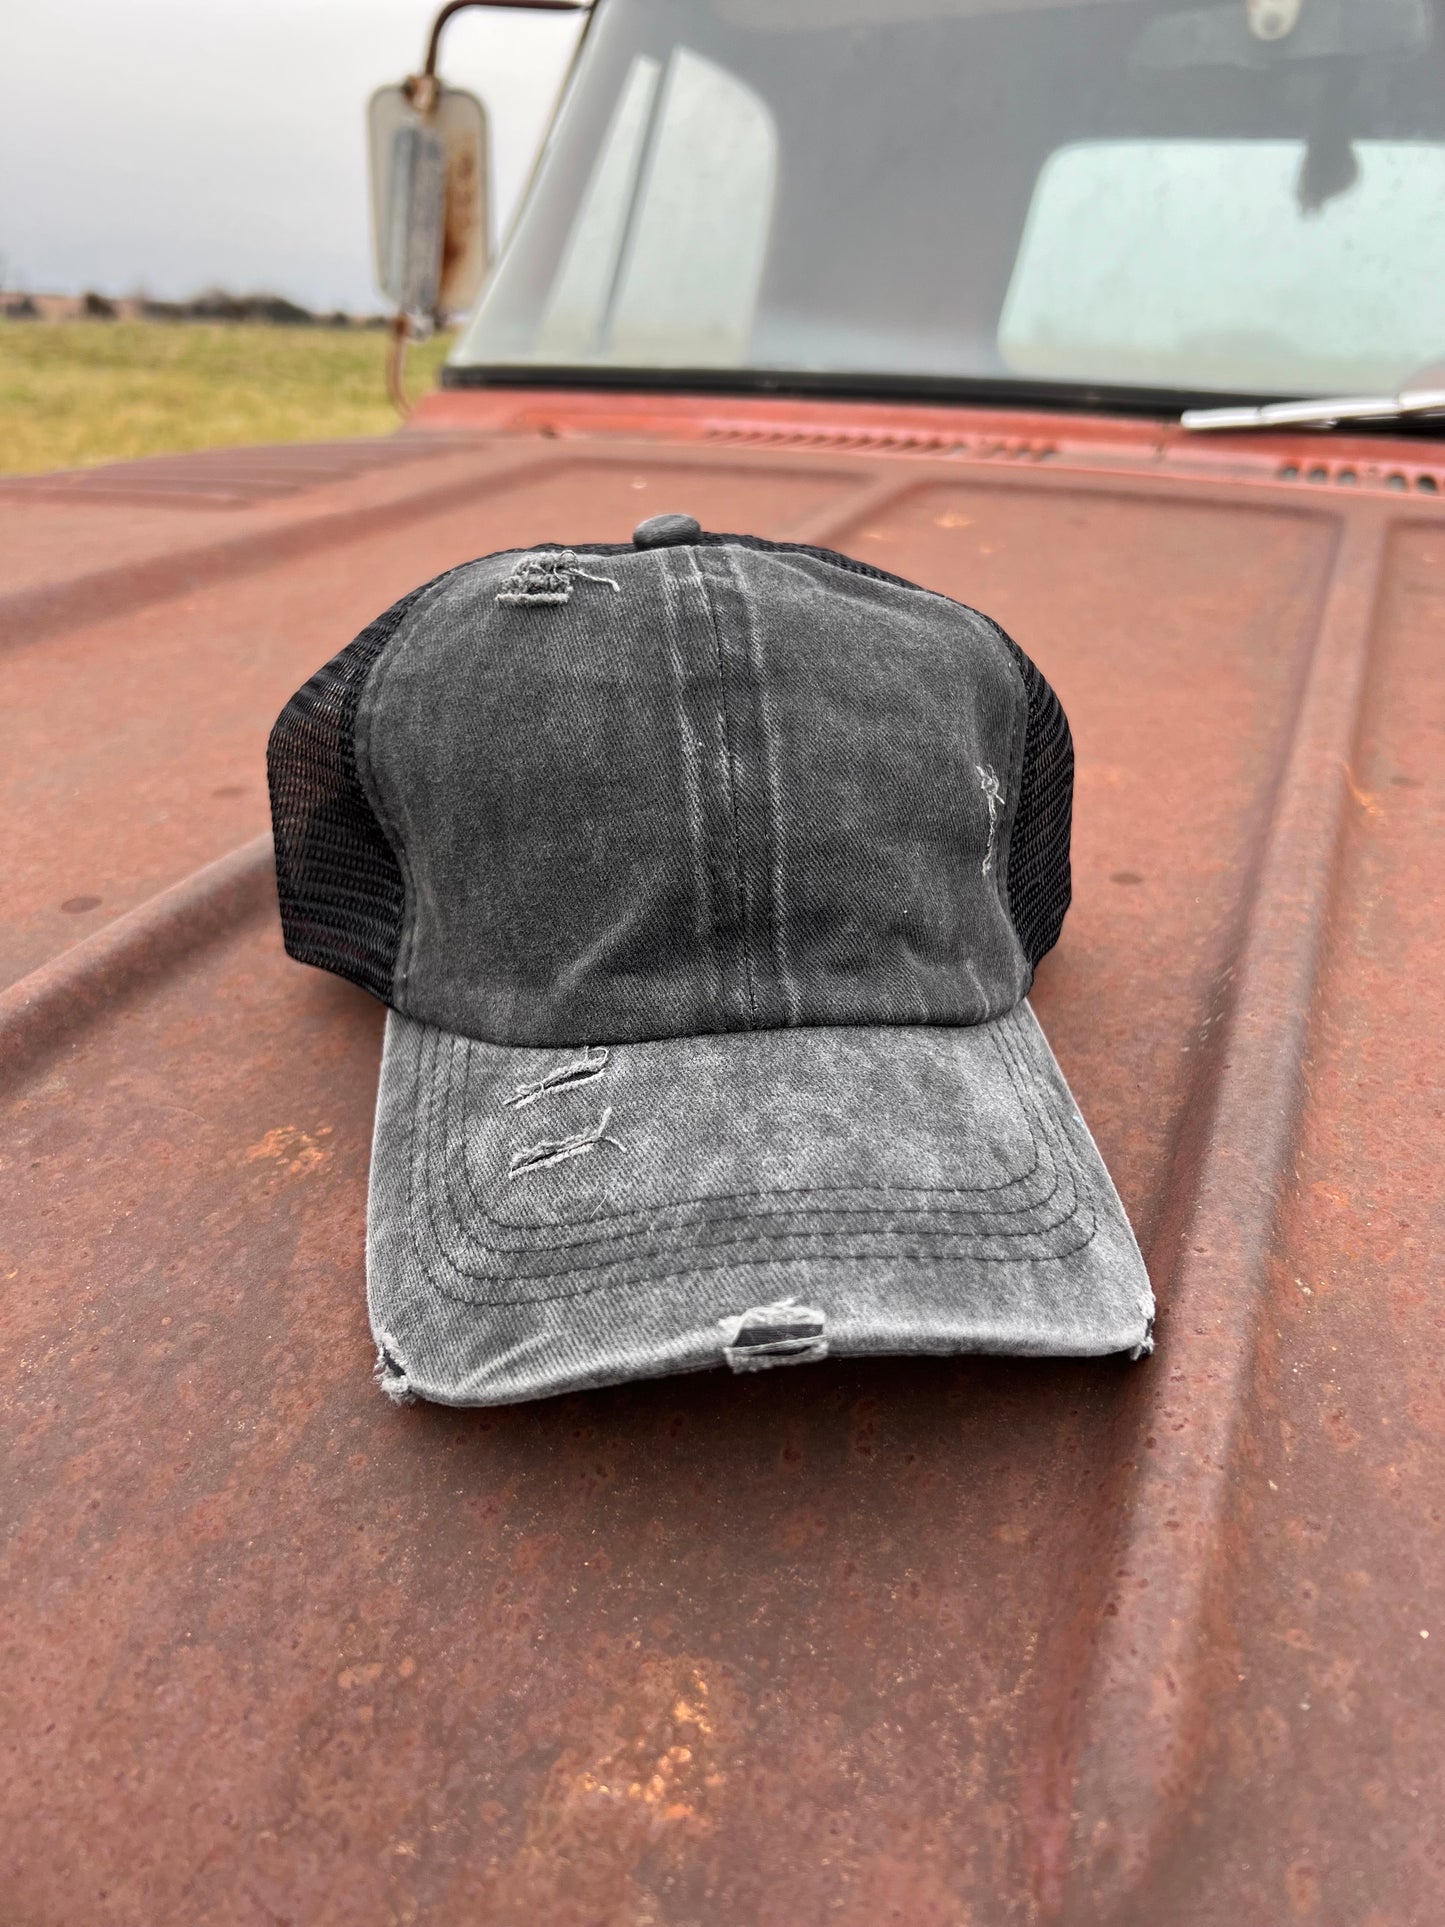 F**k Around and Find Out Distressed Black Baseball Cap